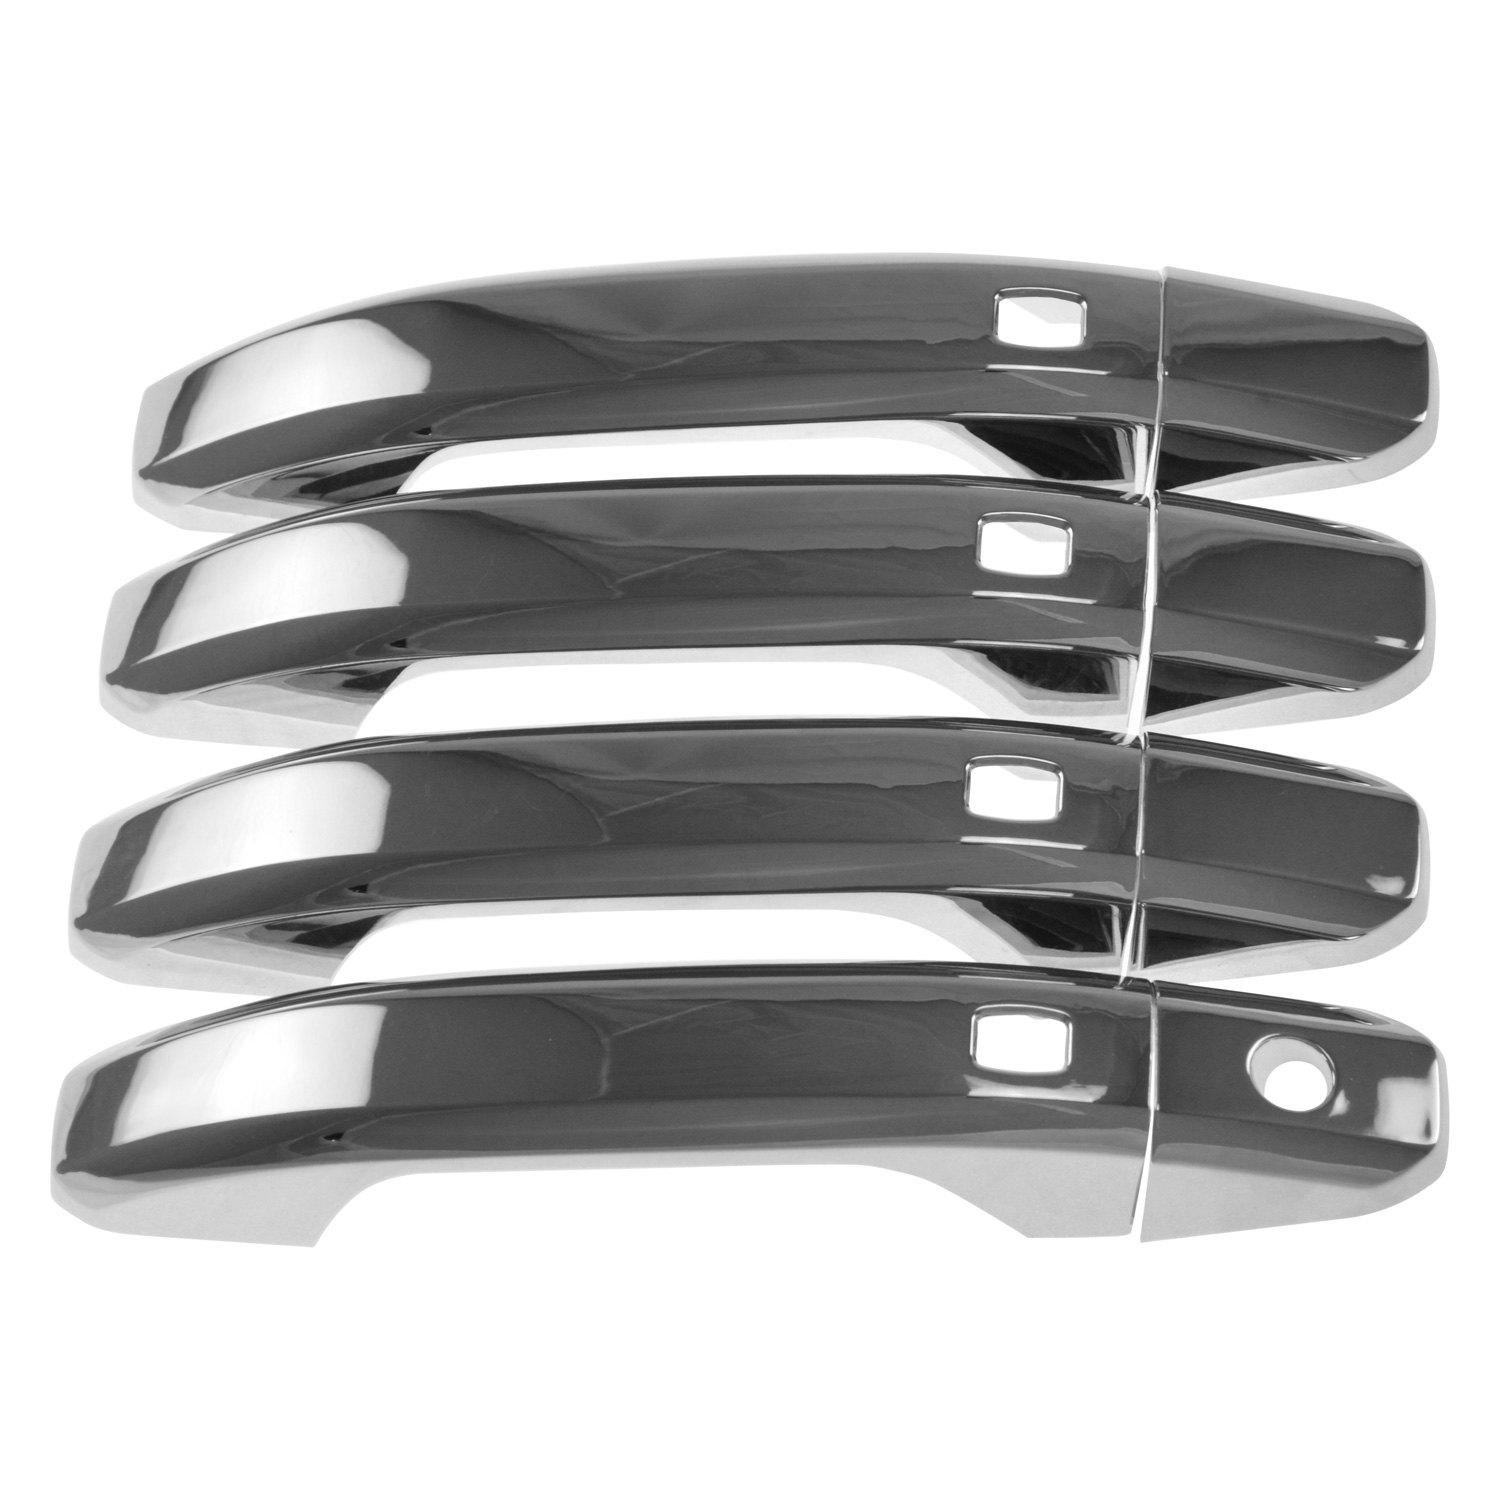 Tyger ABS Triple Chrome Plated Door Handle Cover Fits 2014-2015 Chevy Silverado/GMC Sierra 1500 4 Doors Without Passenger Keyhole Handle Cover Fits 